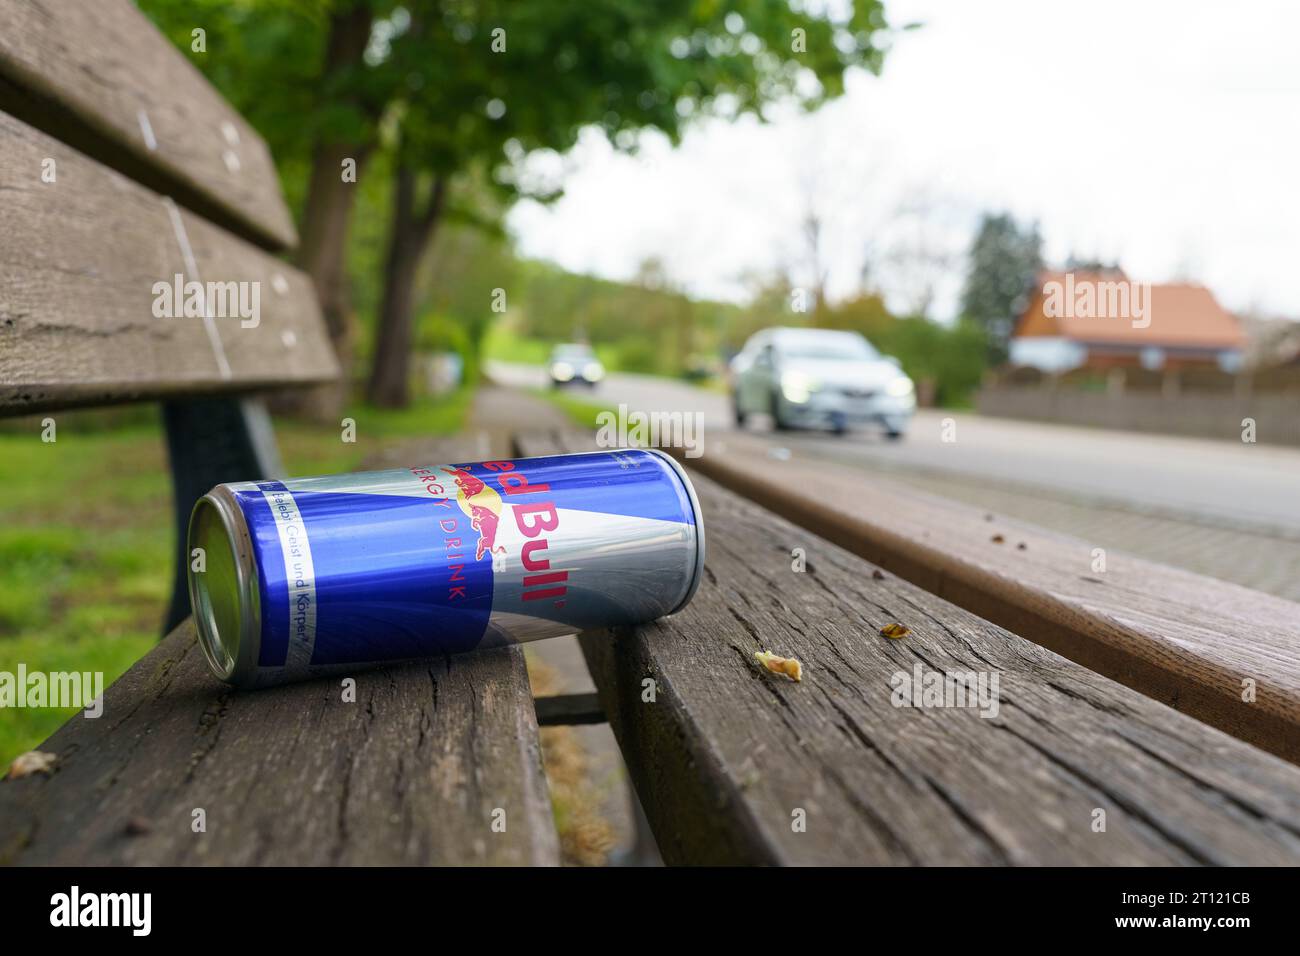 Weinberg, Germany - May 6, 2023: On a wooden bench lies an empty metal can of energy drink - Red Bull. In the blurry background, cars are driving alon Stock Photo